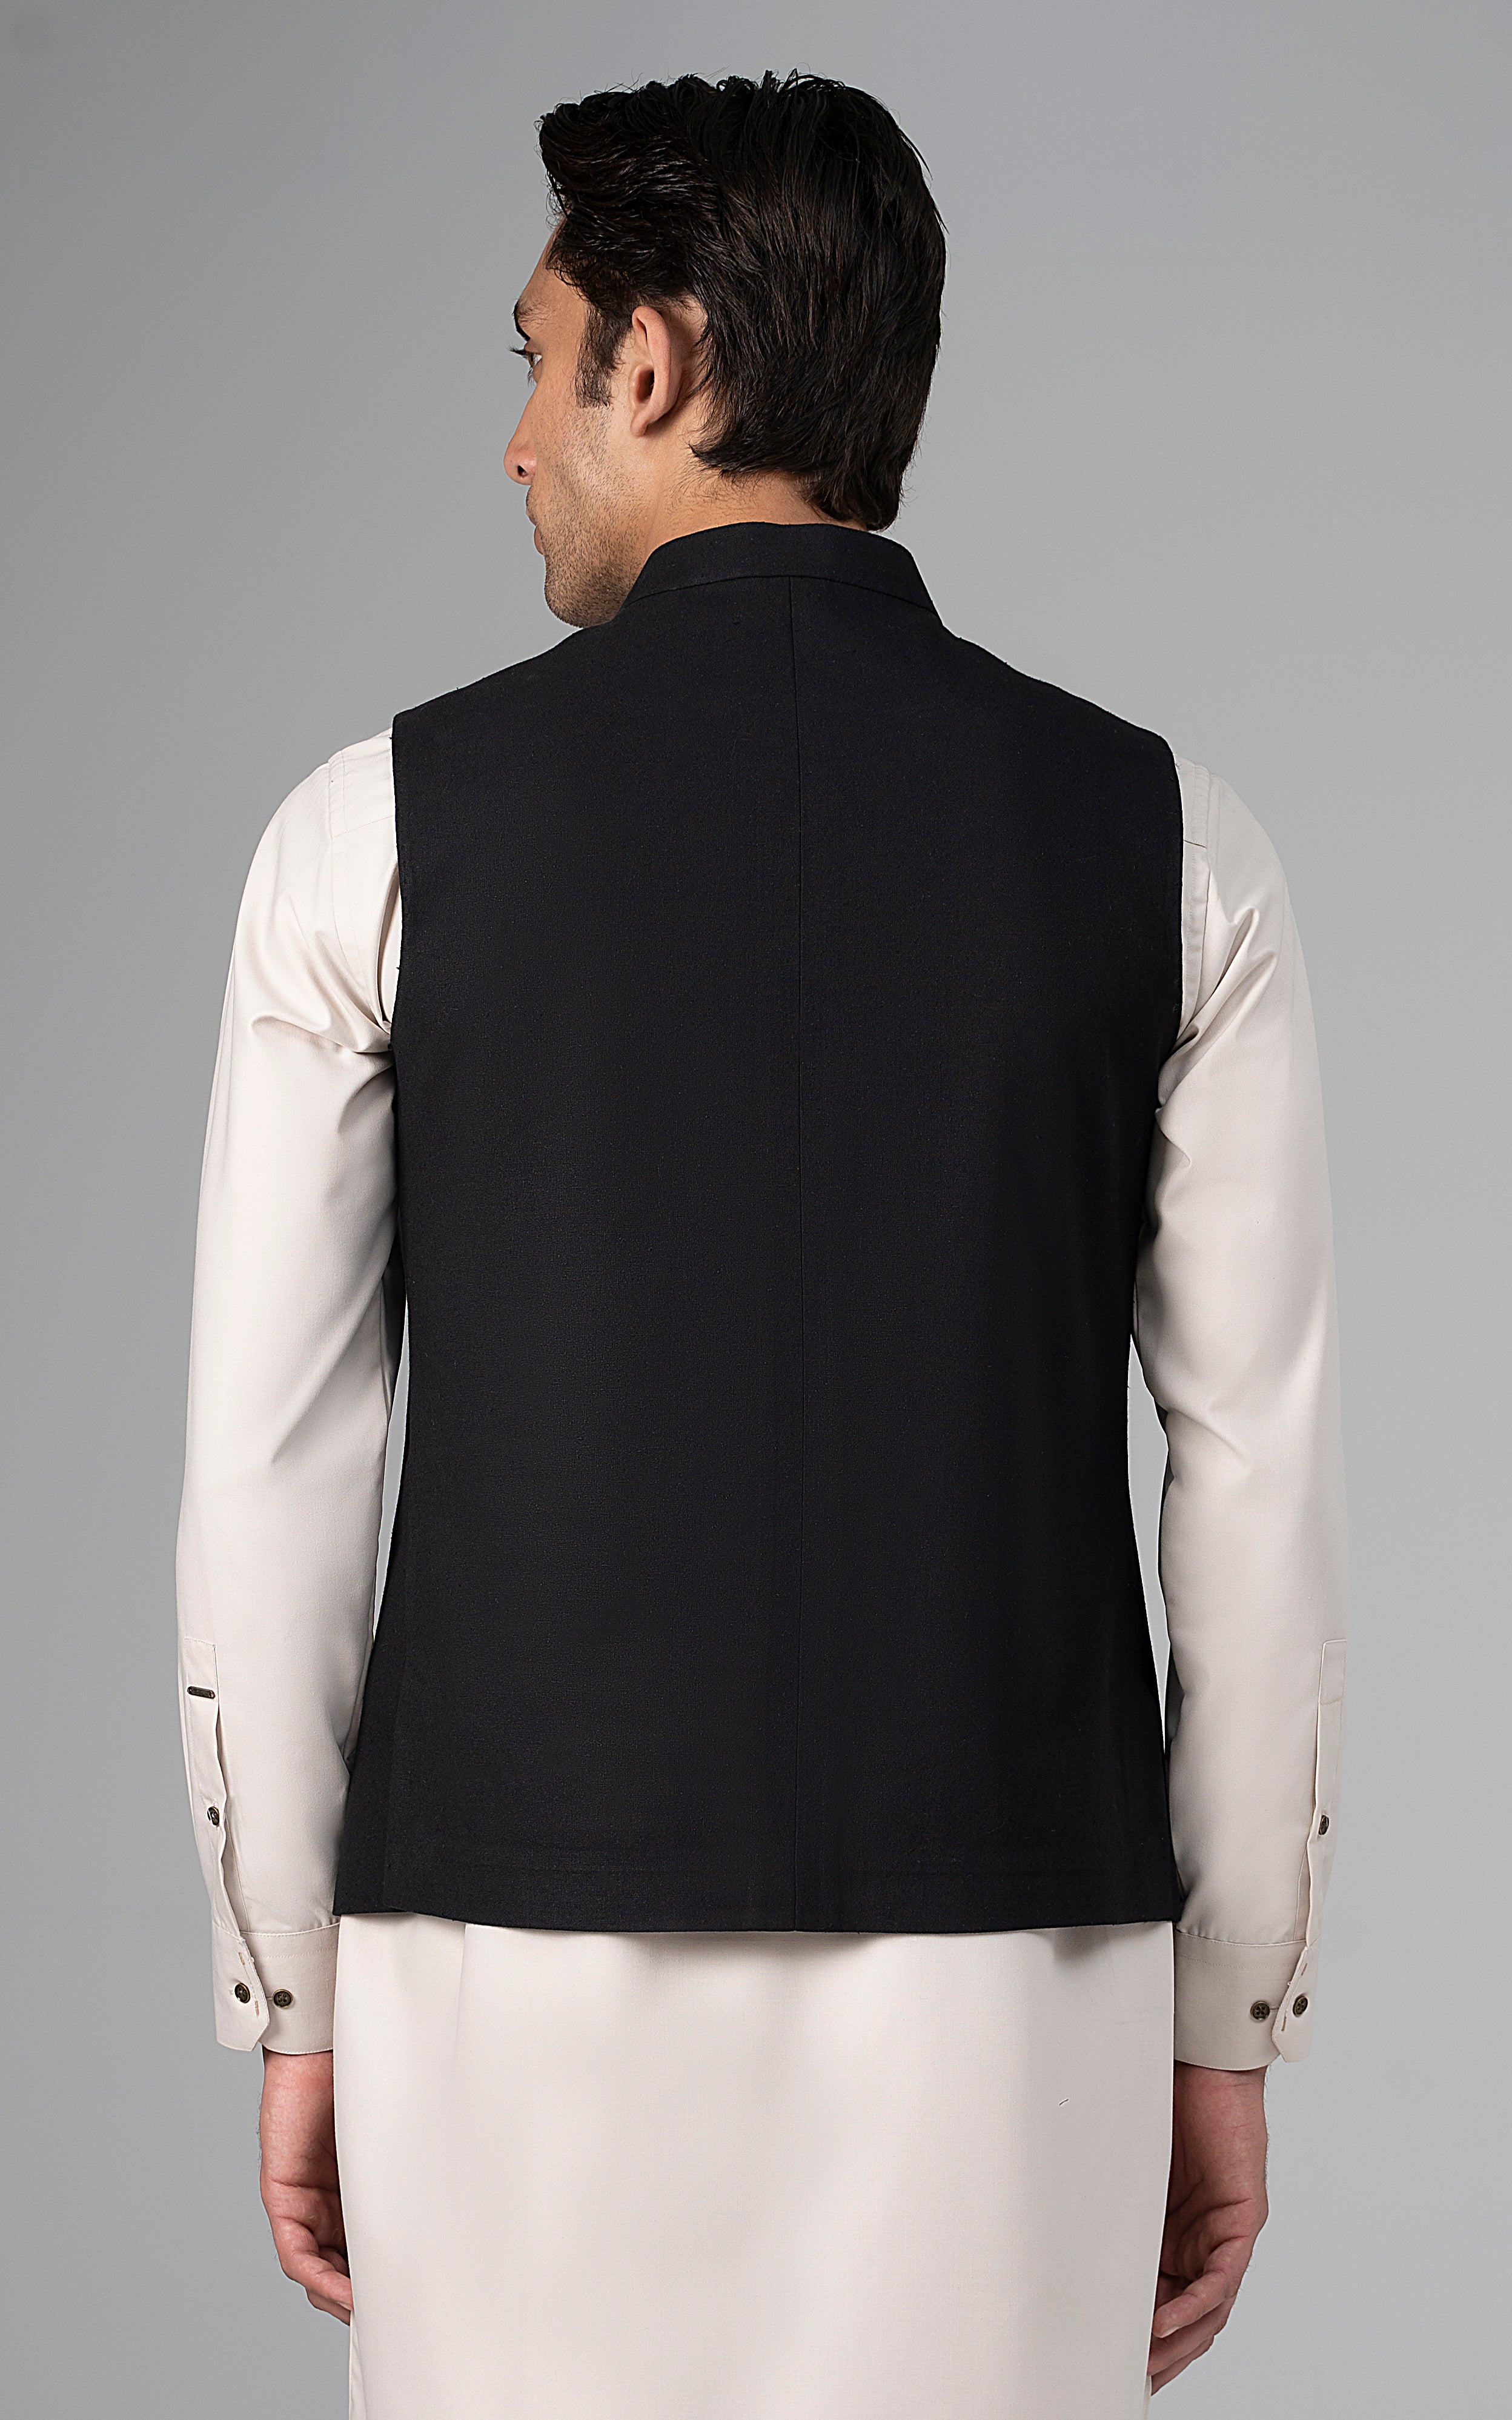 LOGO EMBROIDERED WAISTCOAT- CLASSIC COLLECTION BLACK